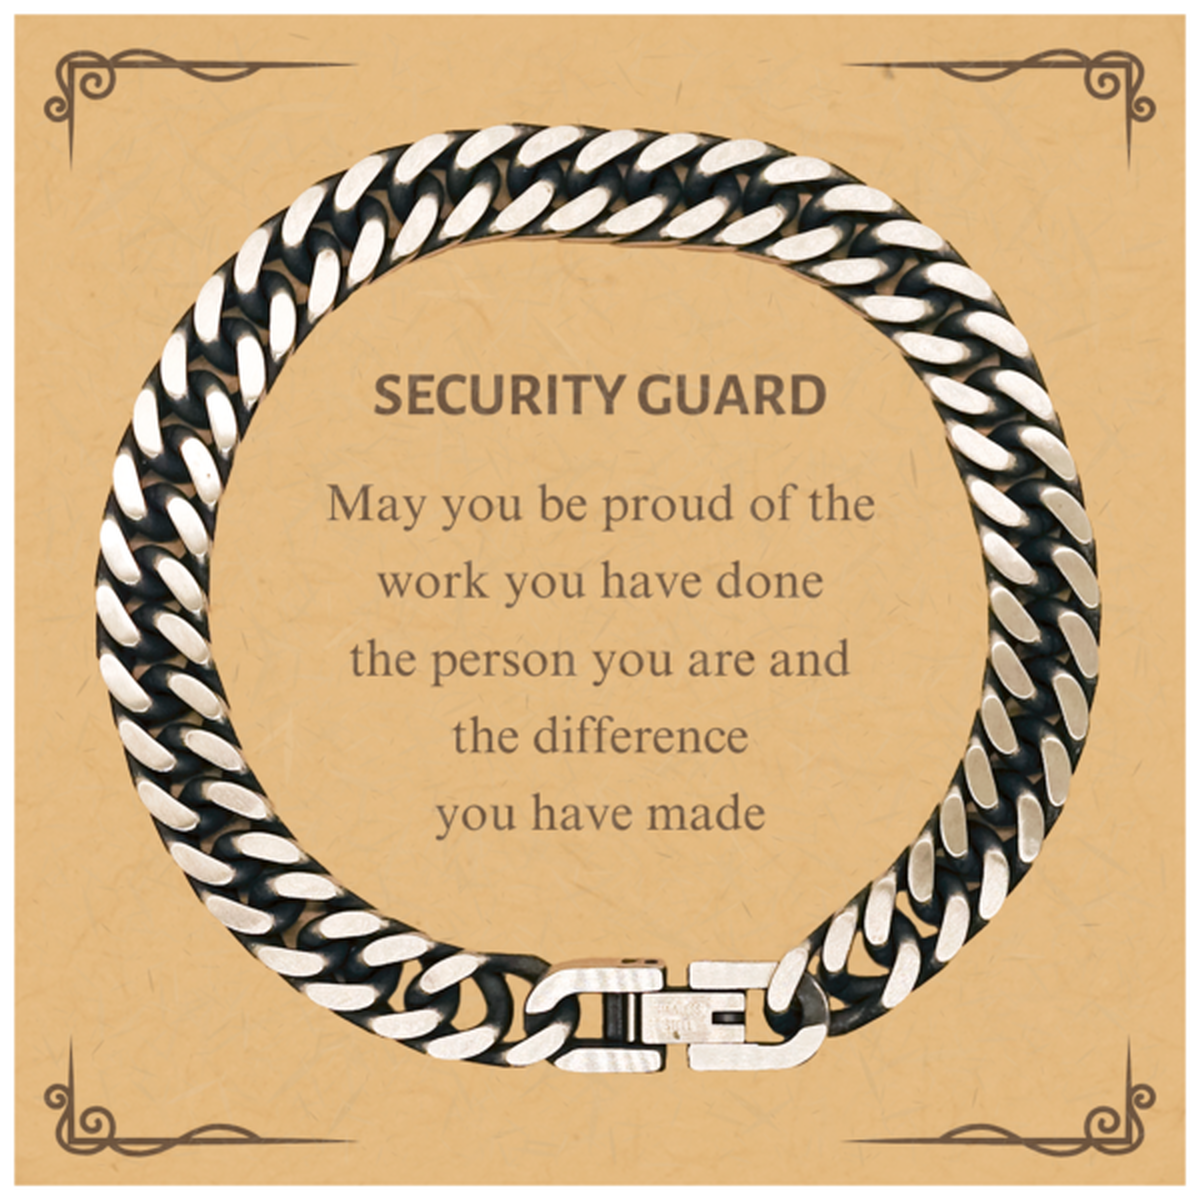 Security Guard May you be proud of the work you have done, Retirement Security Guard Cuban Link Chain Bracelet for Colleague Appreciation Gifts Amazing for Security Guard